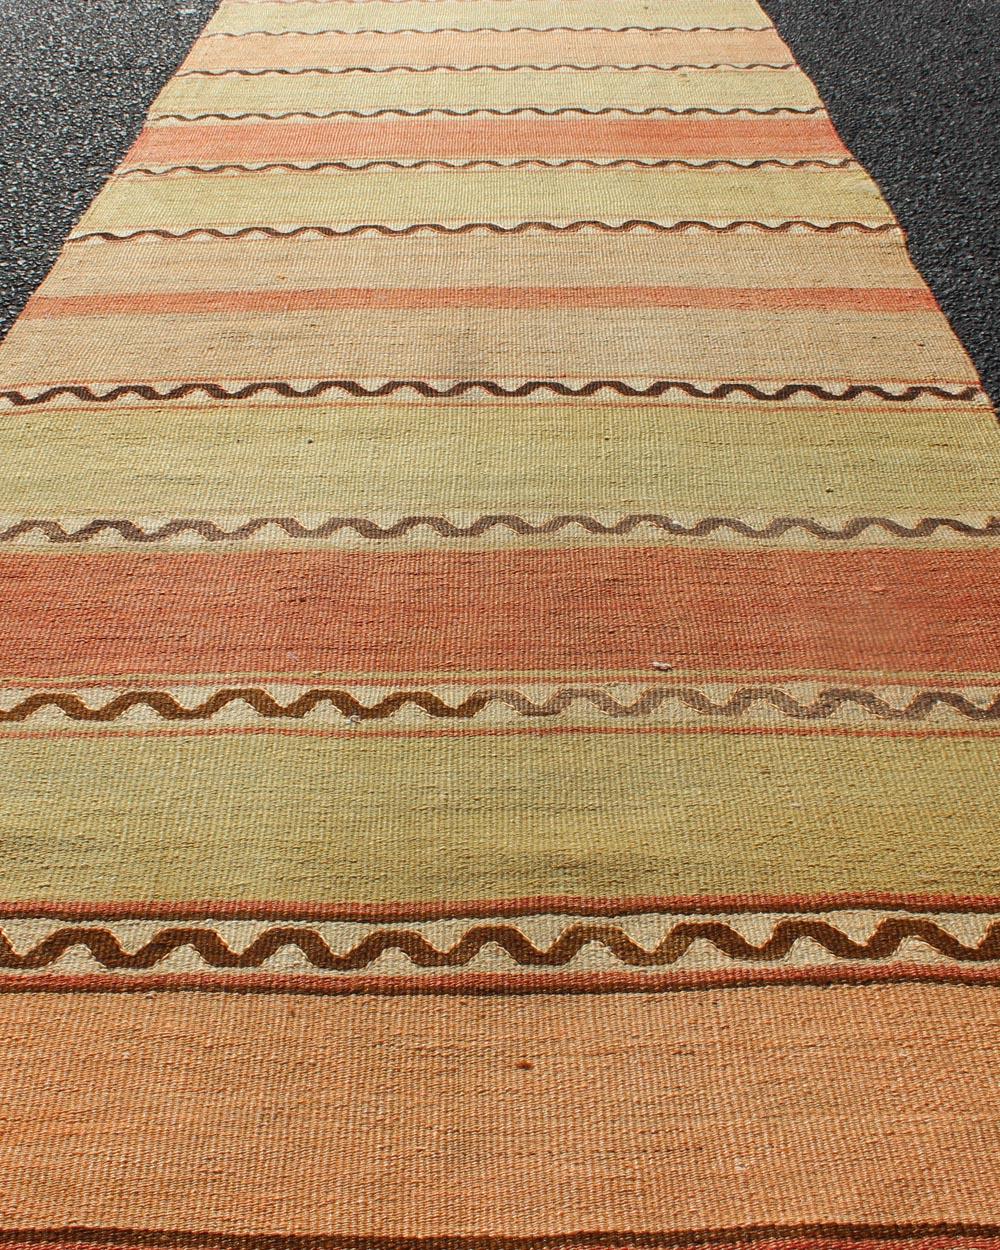 20th Century Vintage Turkish Kilim Runner with Stripes in Red, Green, Yellow, and Orange For Sale